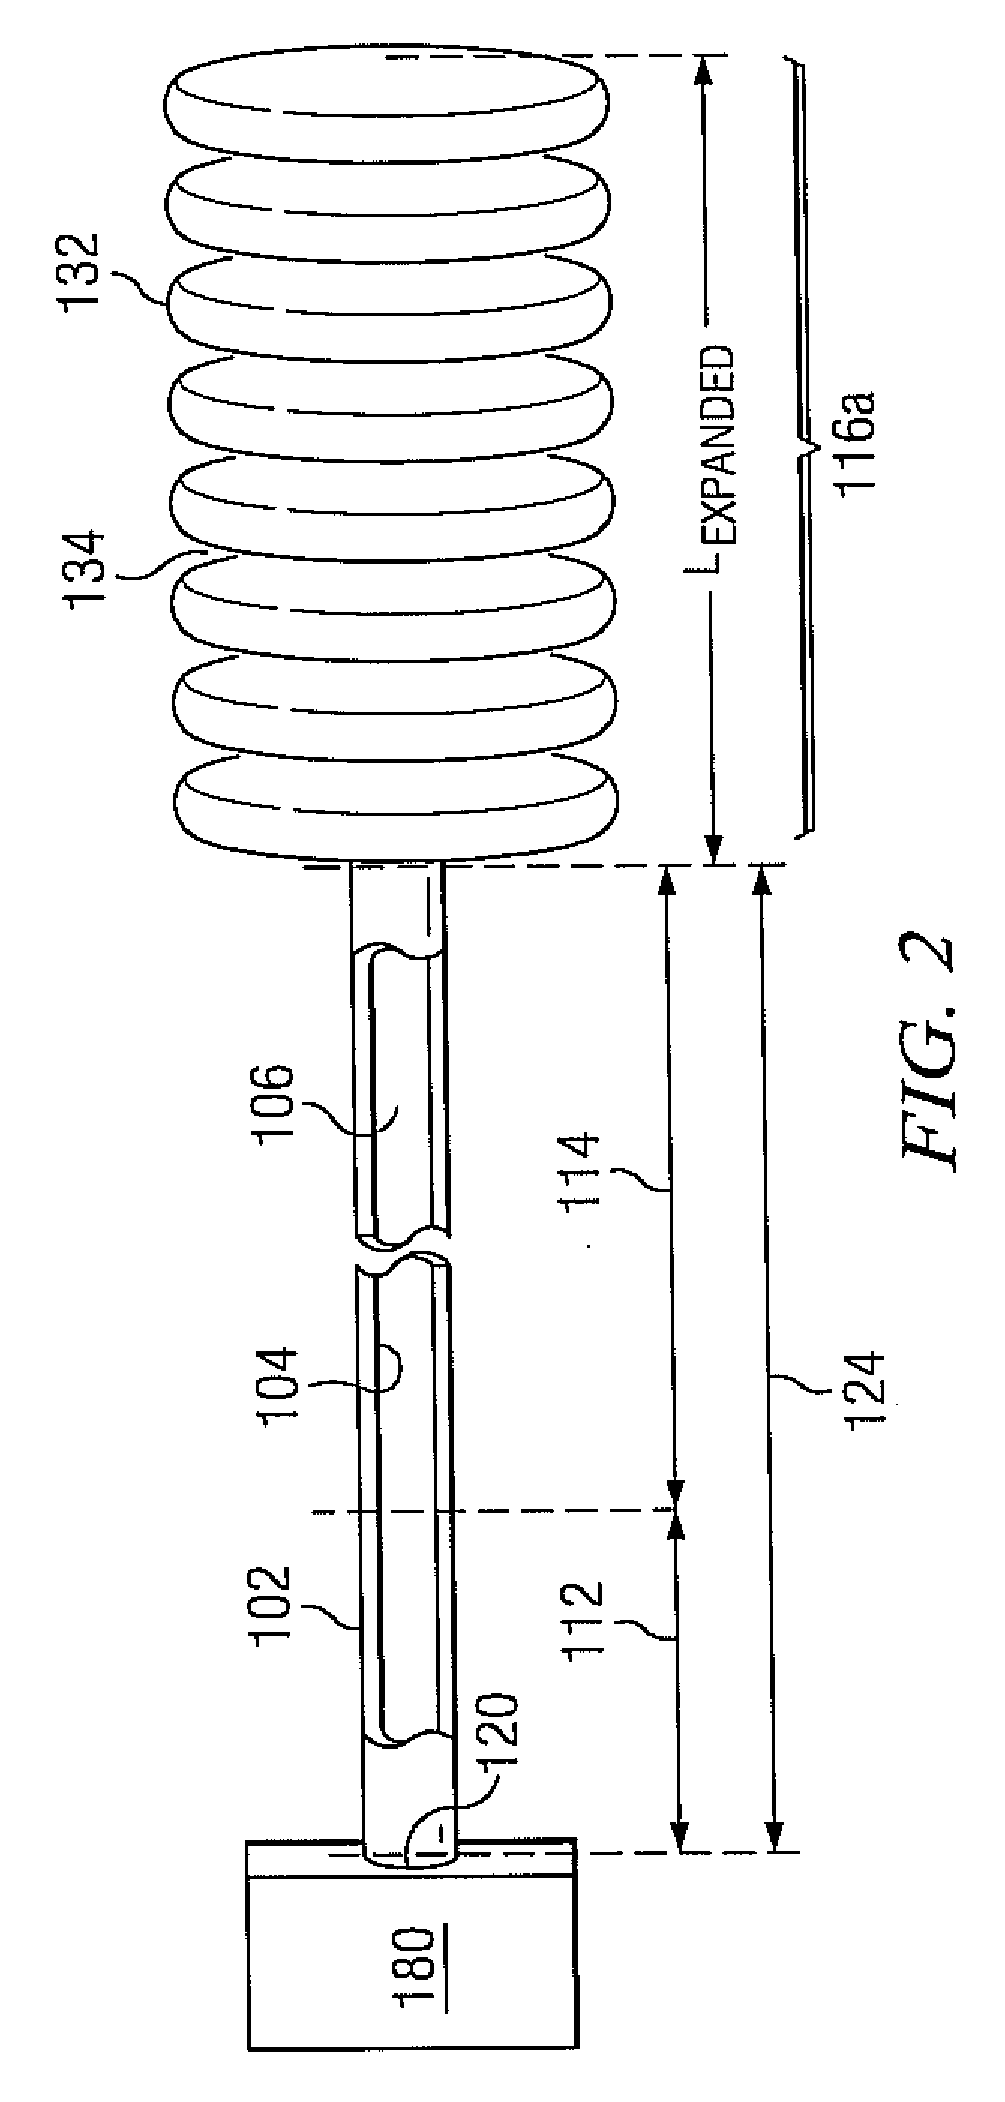 Modified heat pipe for phase change cooling of electronic devices